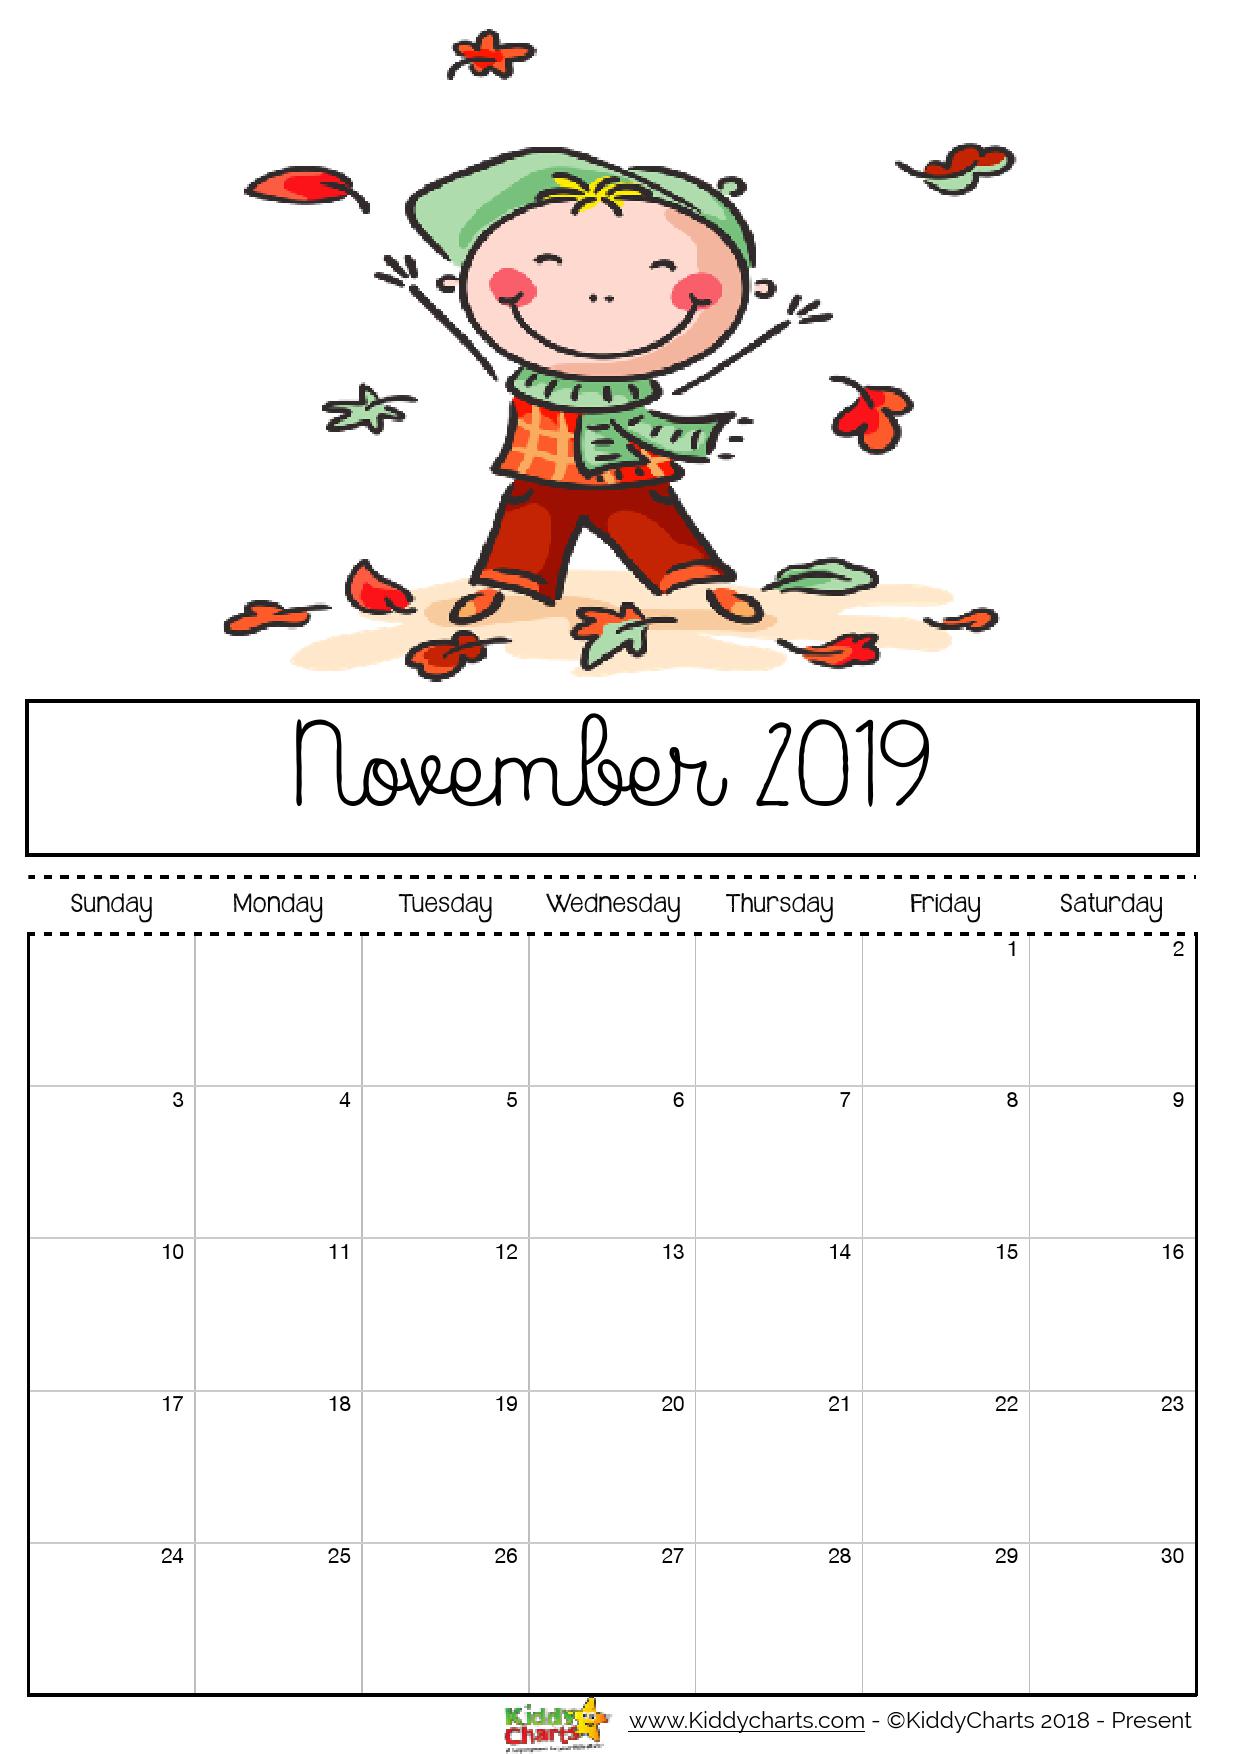 November 2019 printable calendar; boy kicking and playing with leaves - now that looks fun doesn't it?!? #printable #kidsprintables #2019calendar